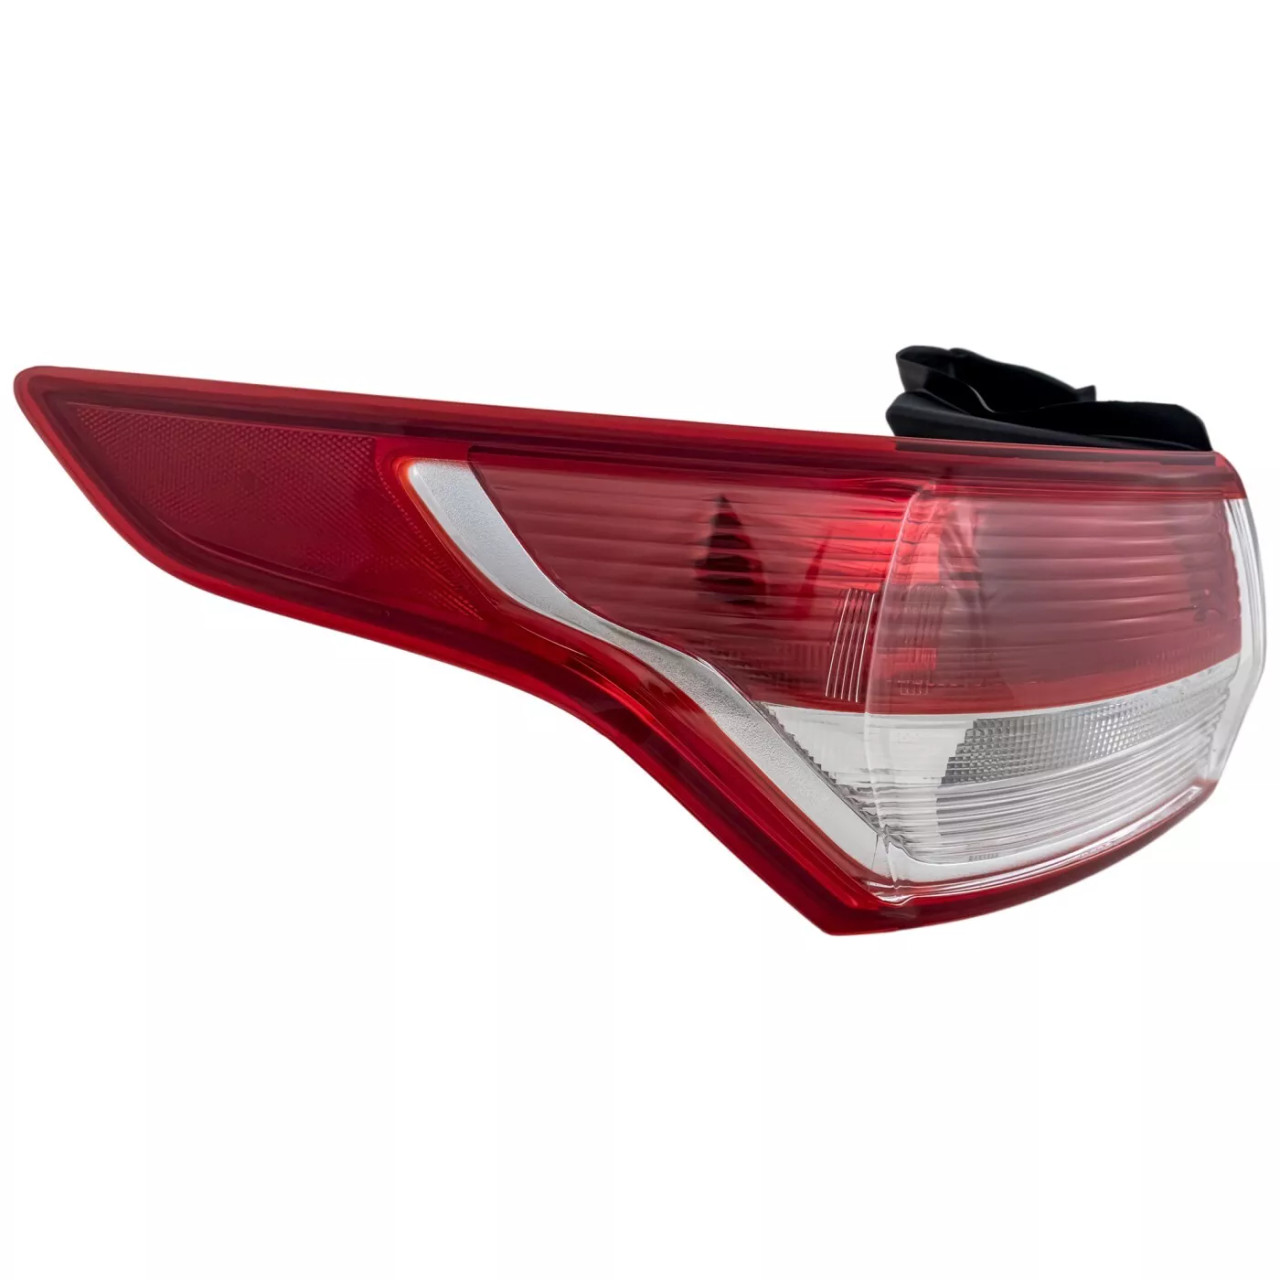 Halogen Tail Light For 2013-2016 Ford Escape Left Clear & Red Lens w/ Bulb(s)